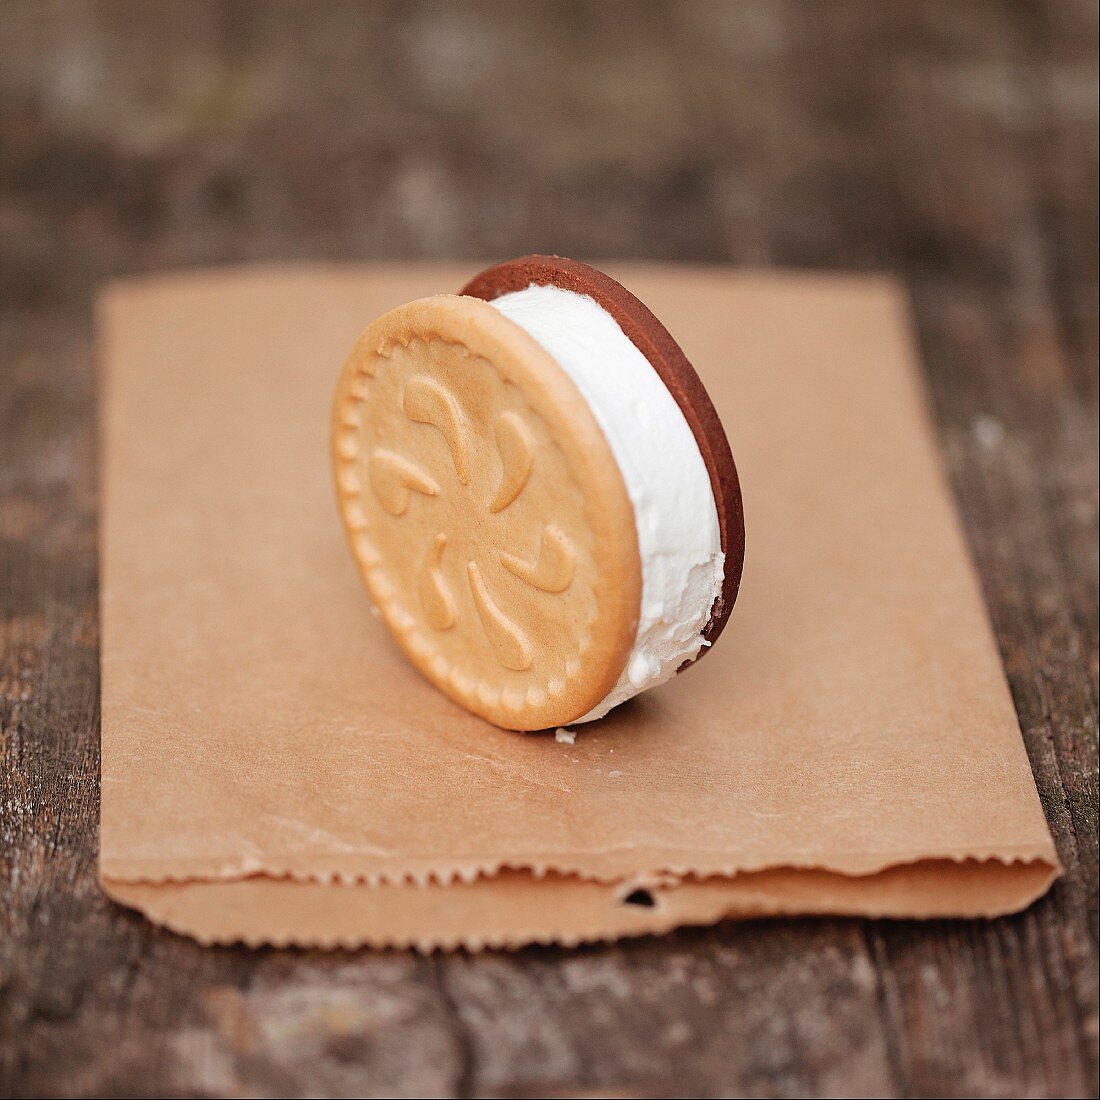 An ice cream sandwich standing upright on a paper bag